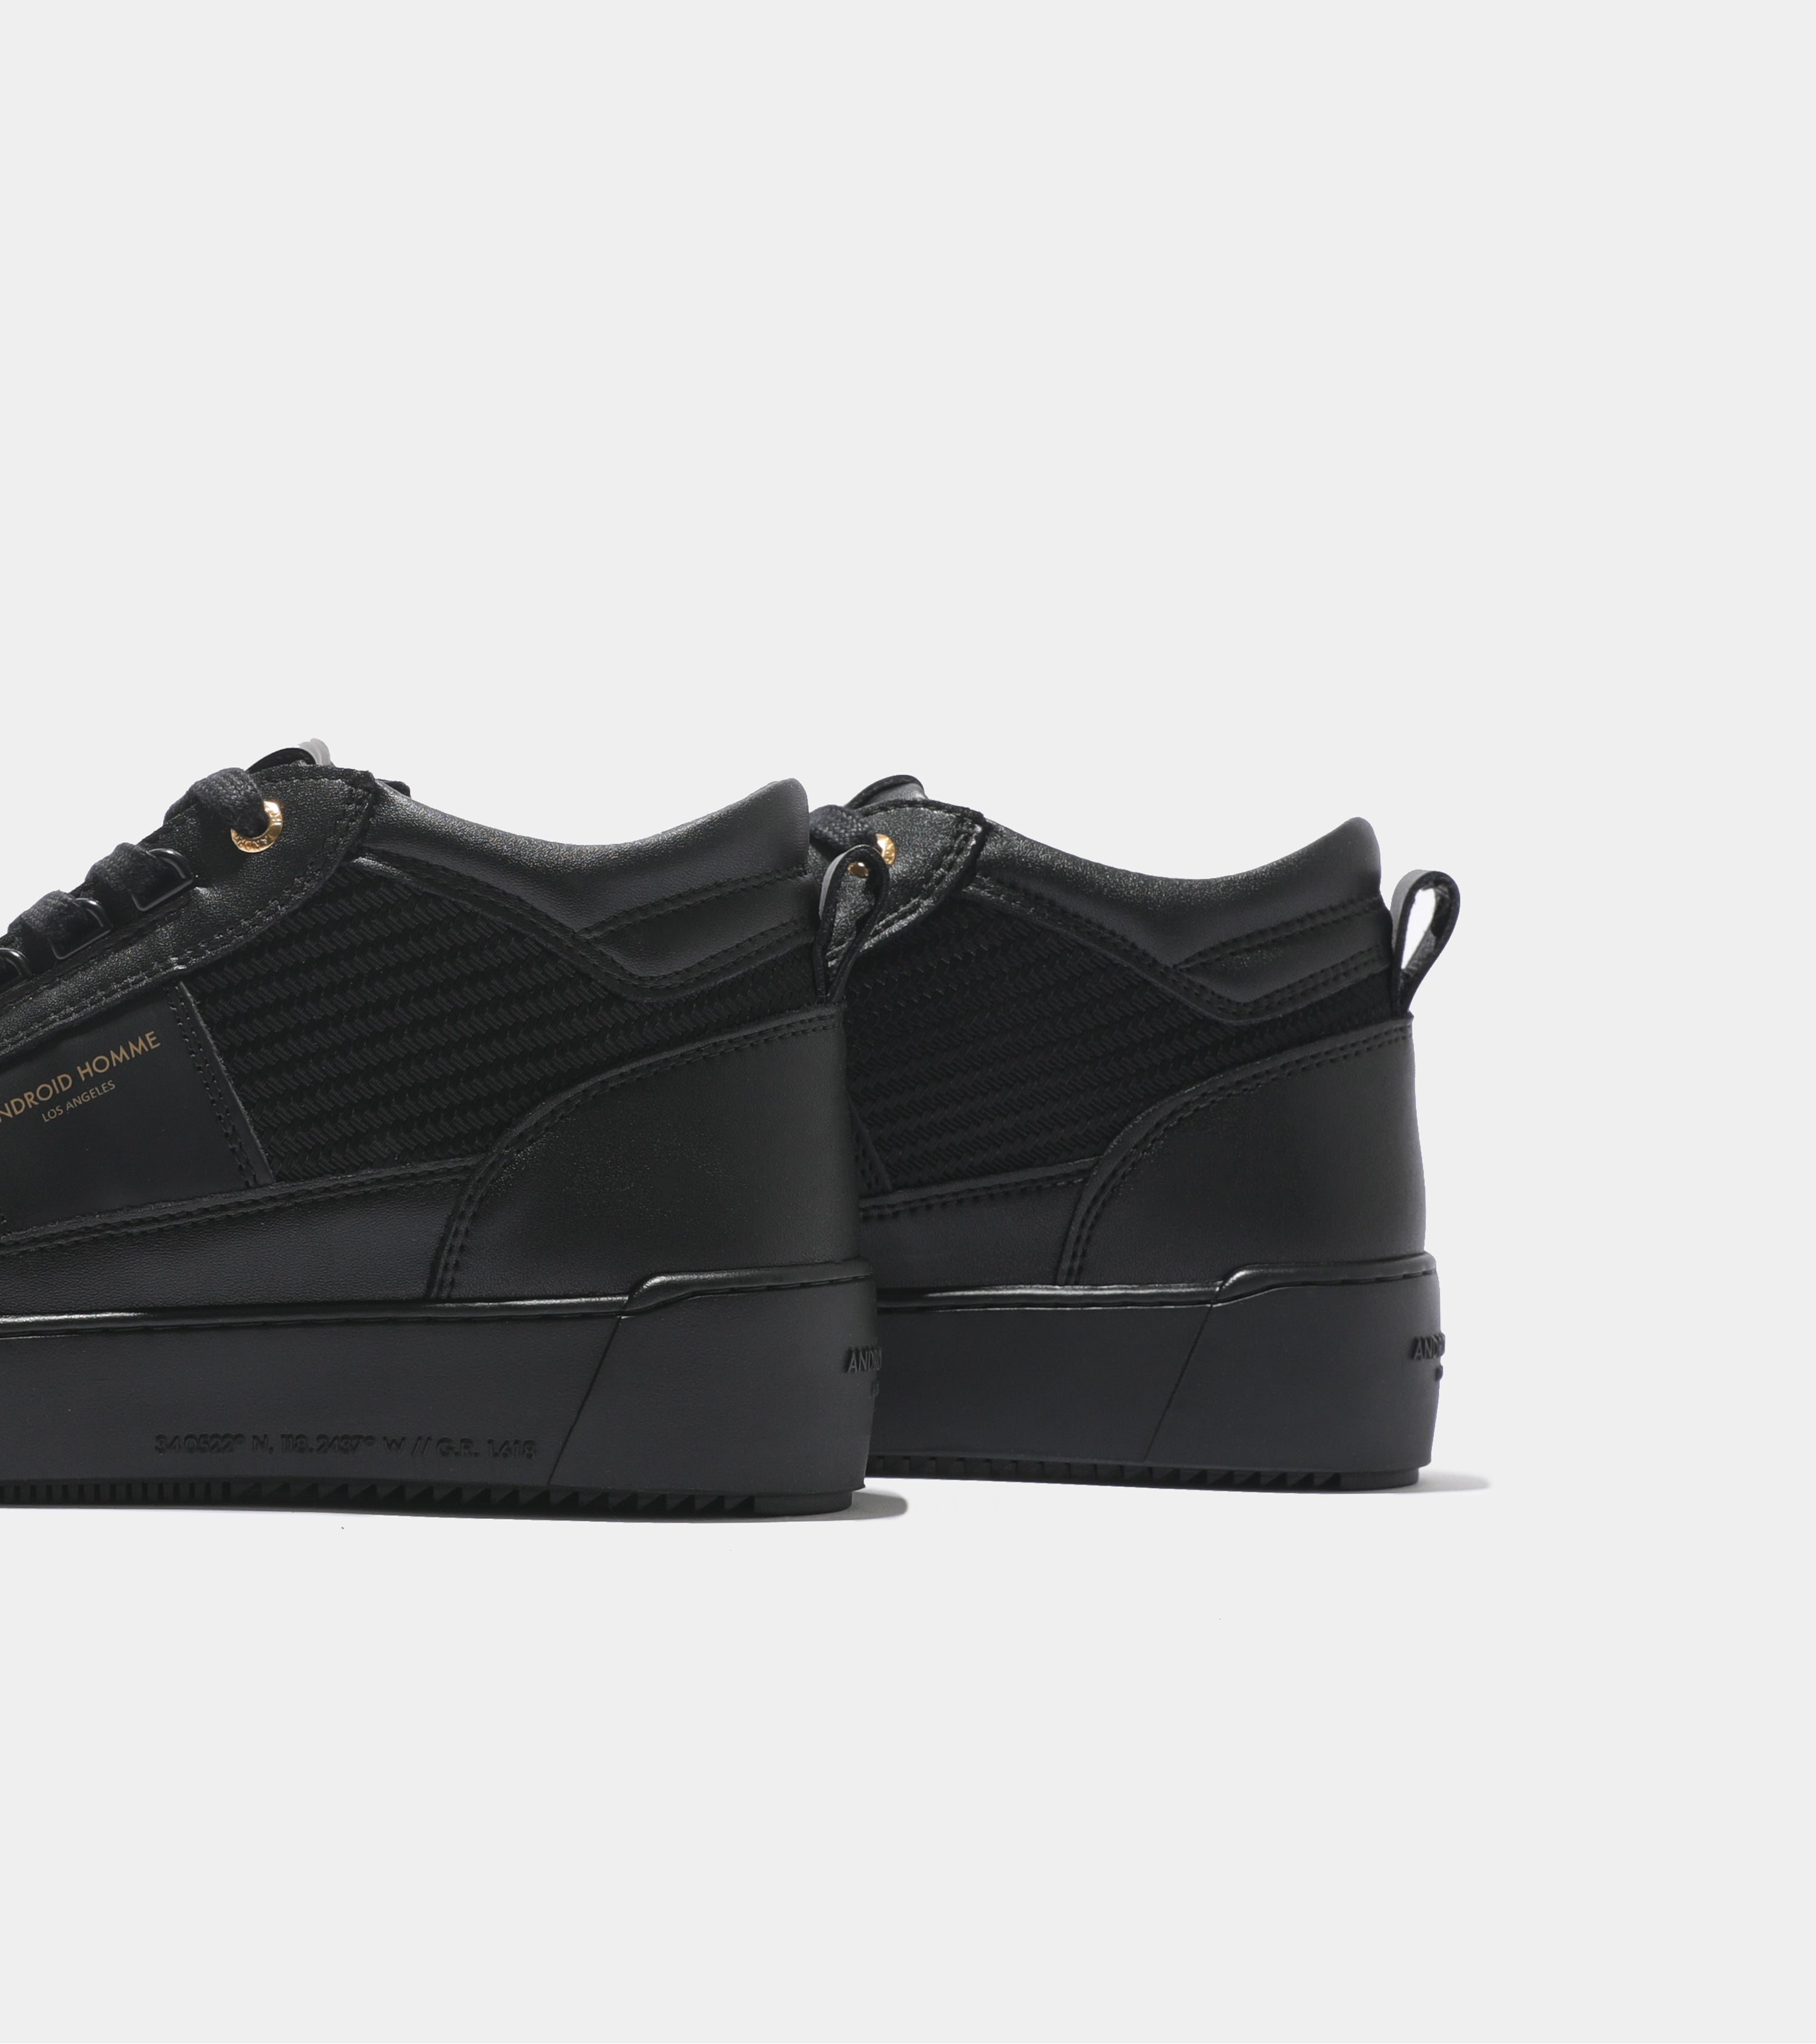 Detailed ccom imagery of the Point Dume Black Carbon Fibre Android Homme Trainers.